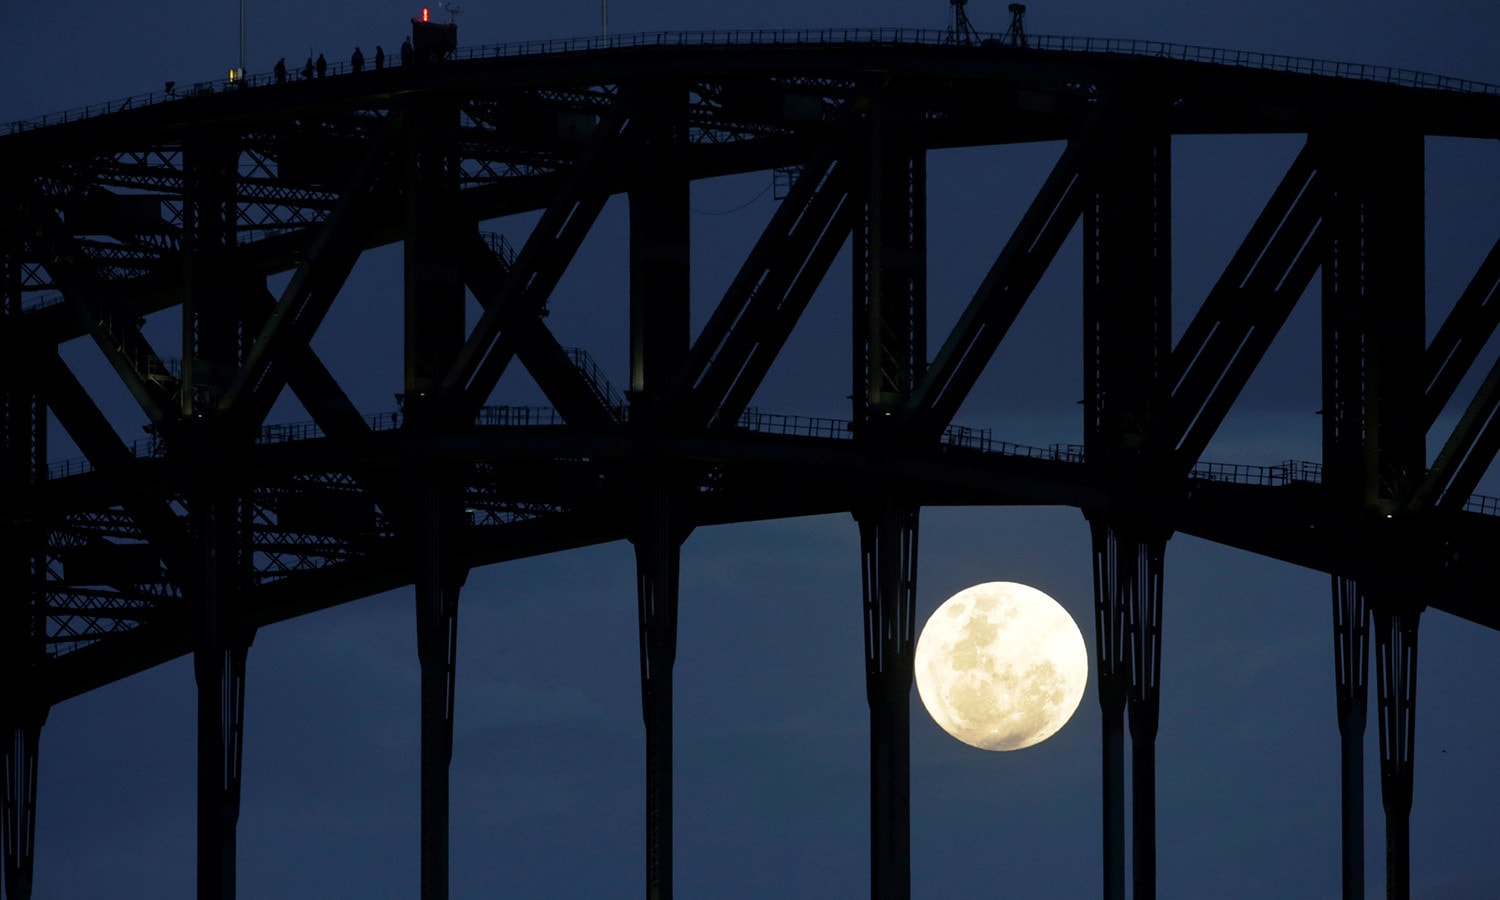 Participants in a Sydney Harbour Bridge Climb walk across the western span of the famous Australian landmark as the Super Moon rises after sunset